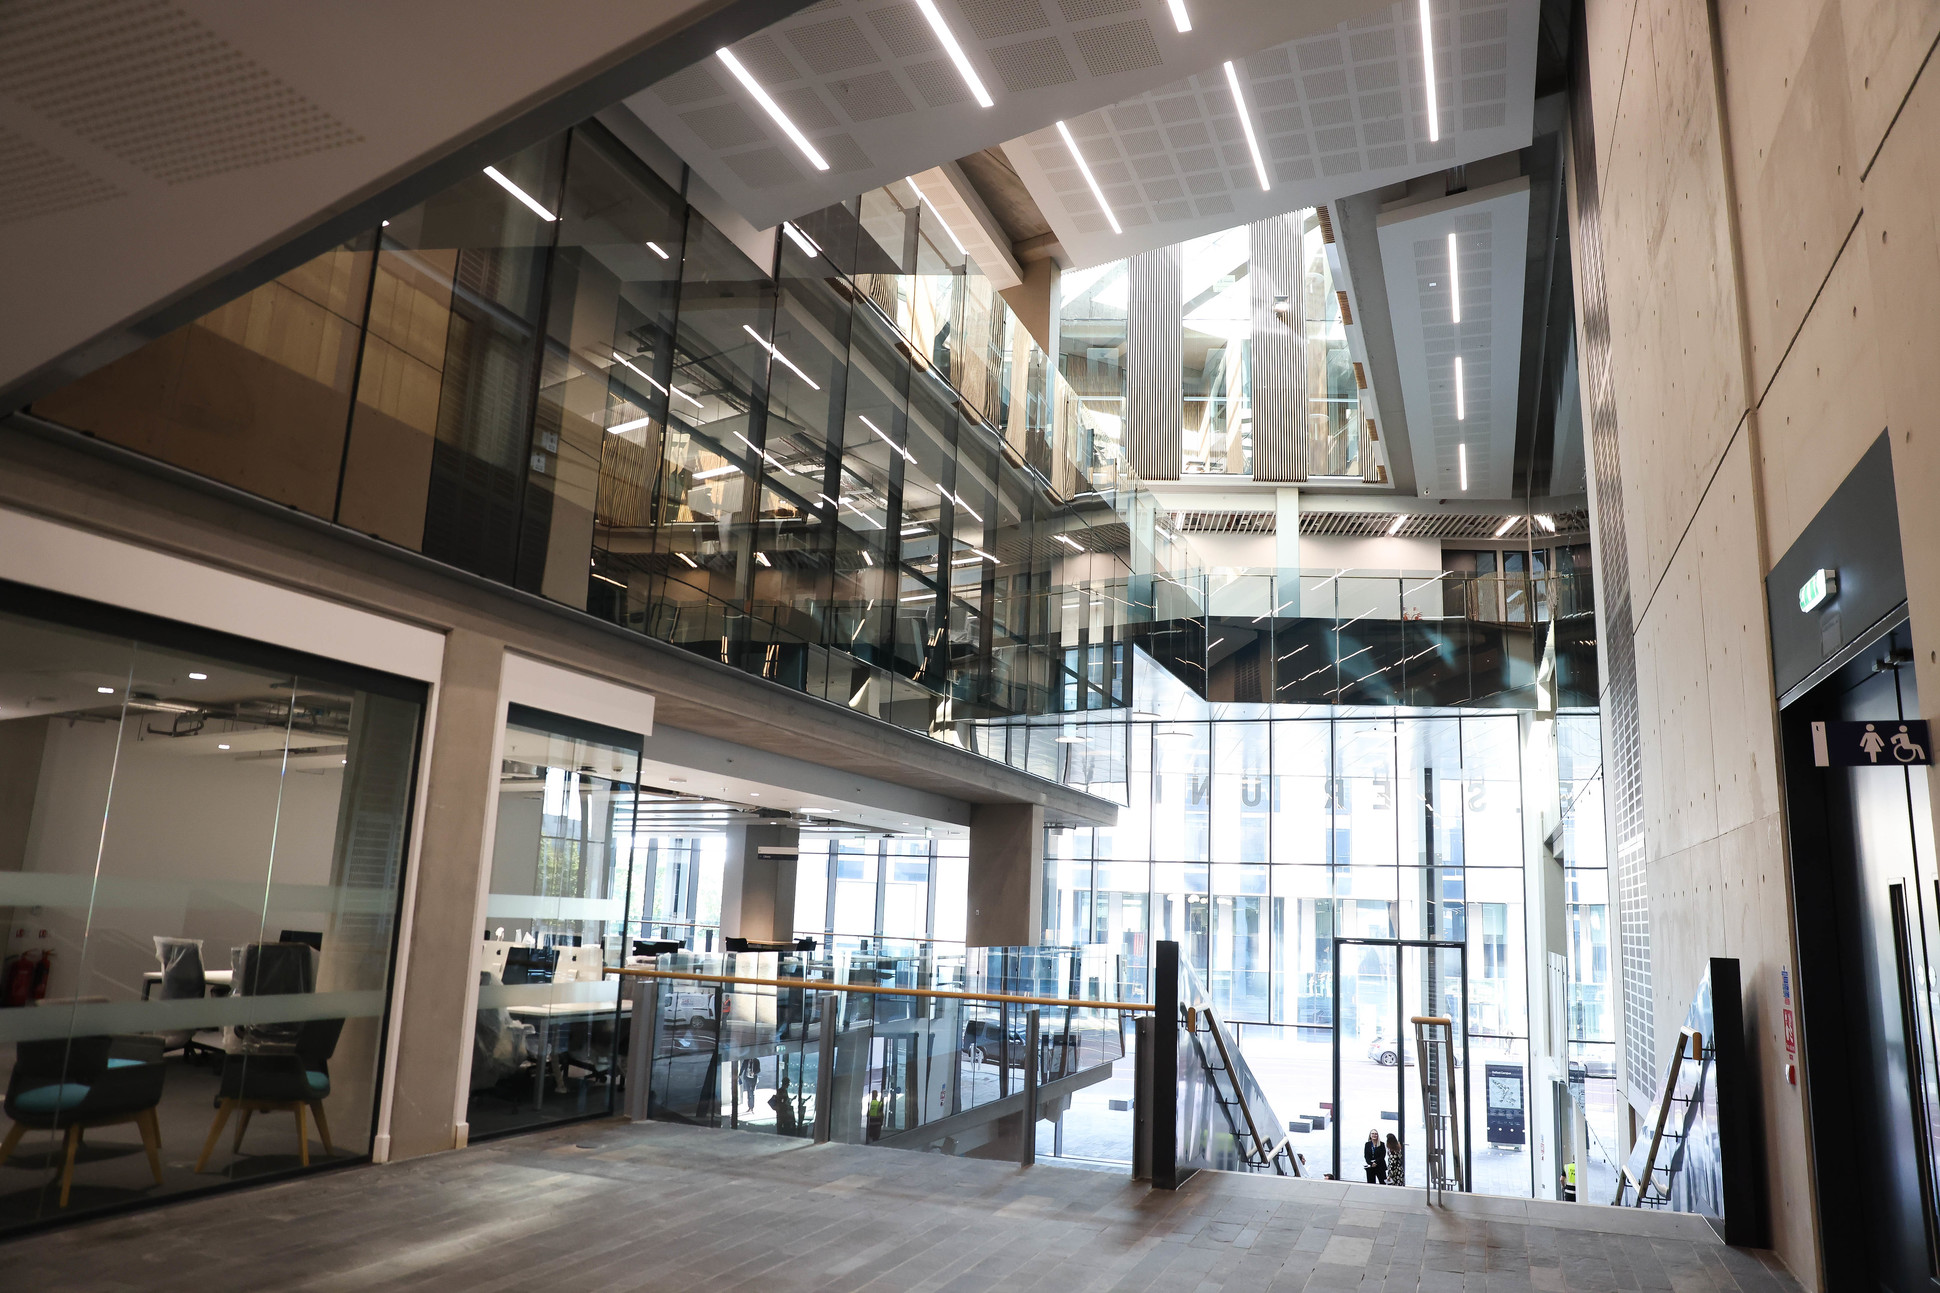 WATCH We go behind the scenes of the new Ulster University Belfast campus